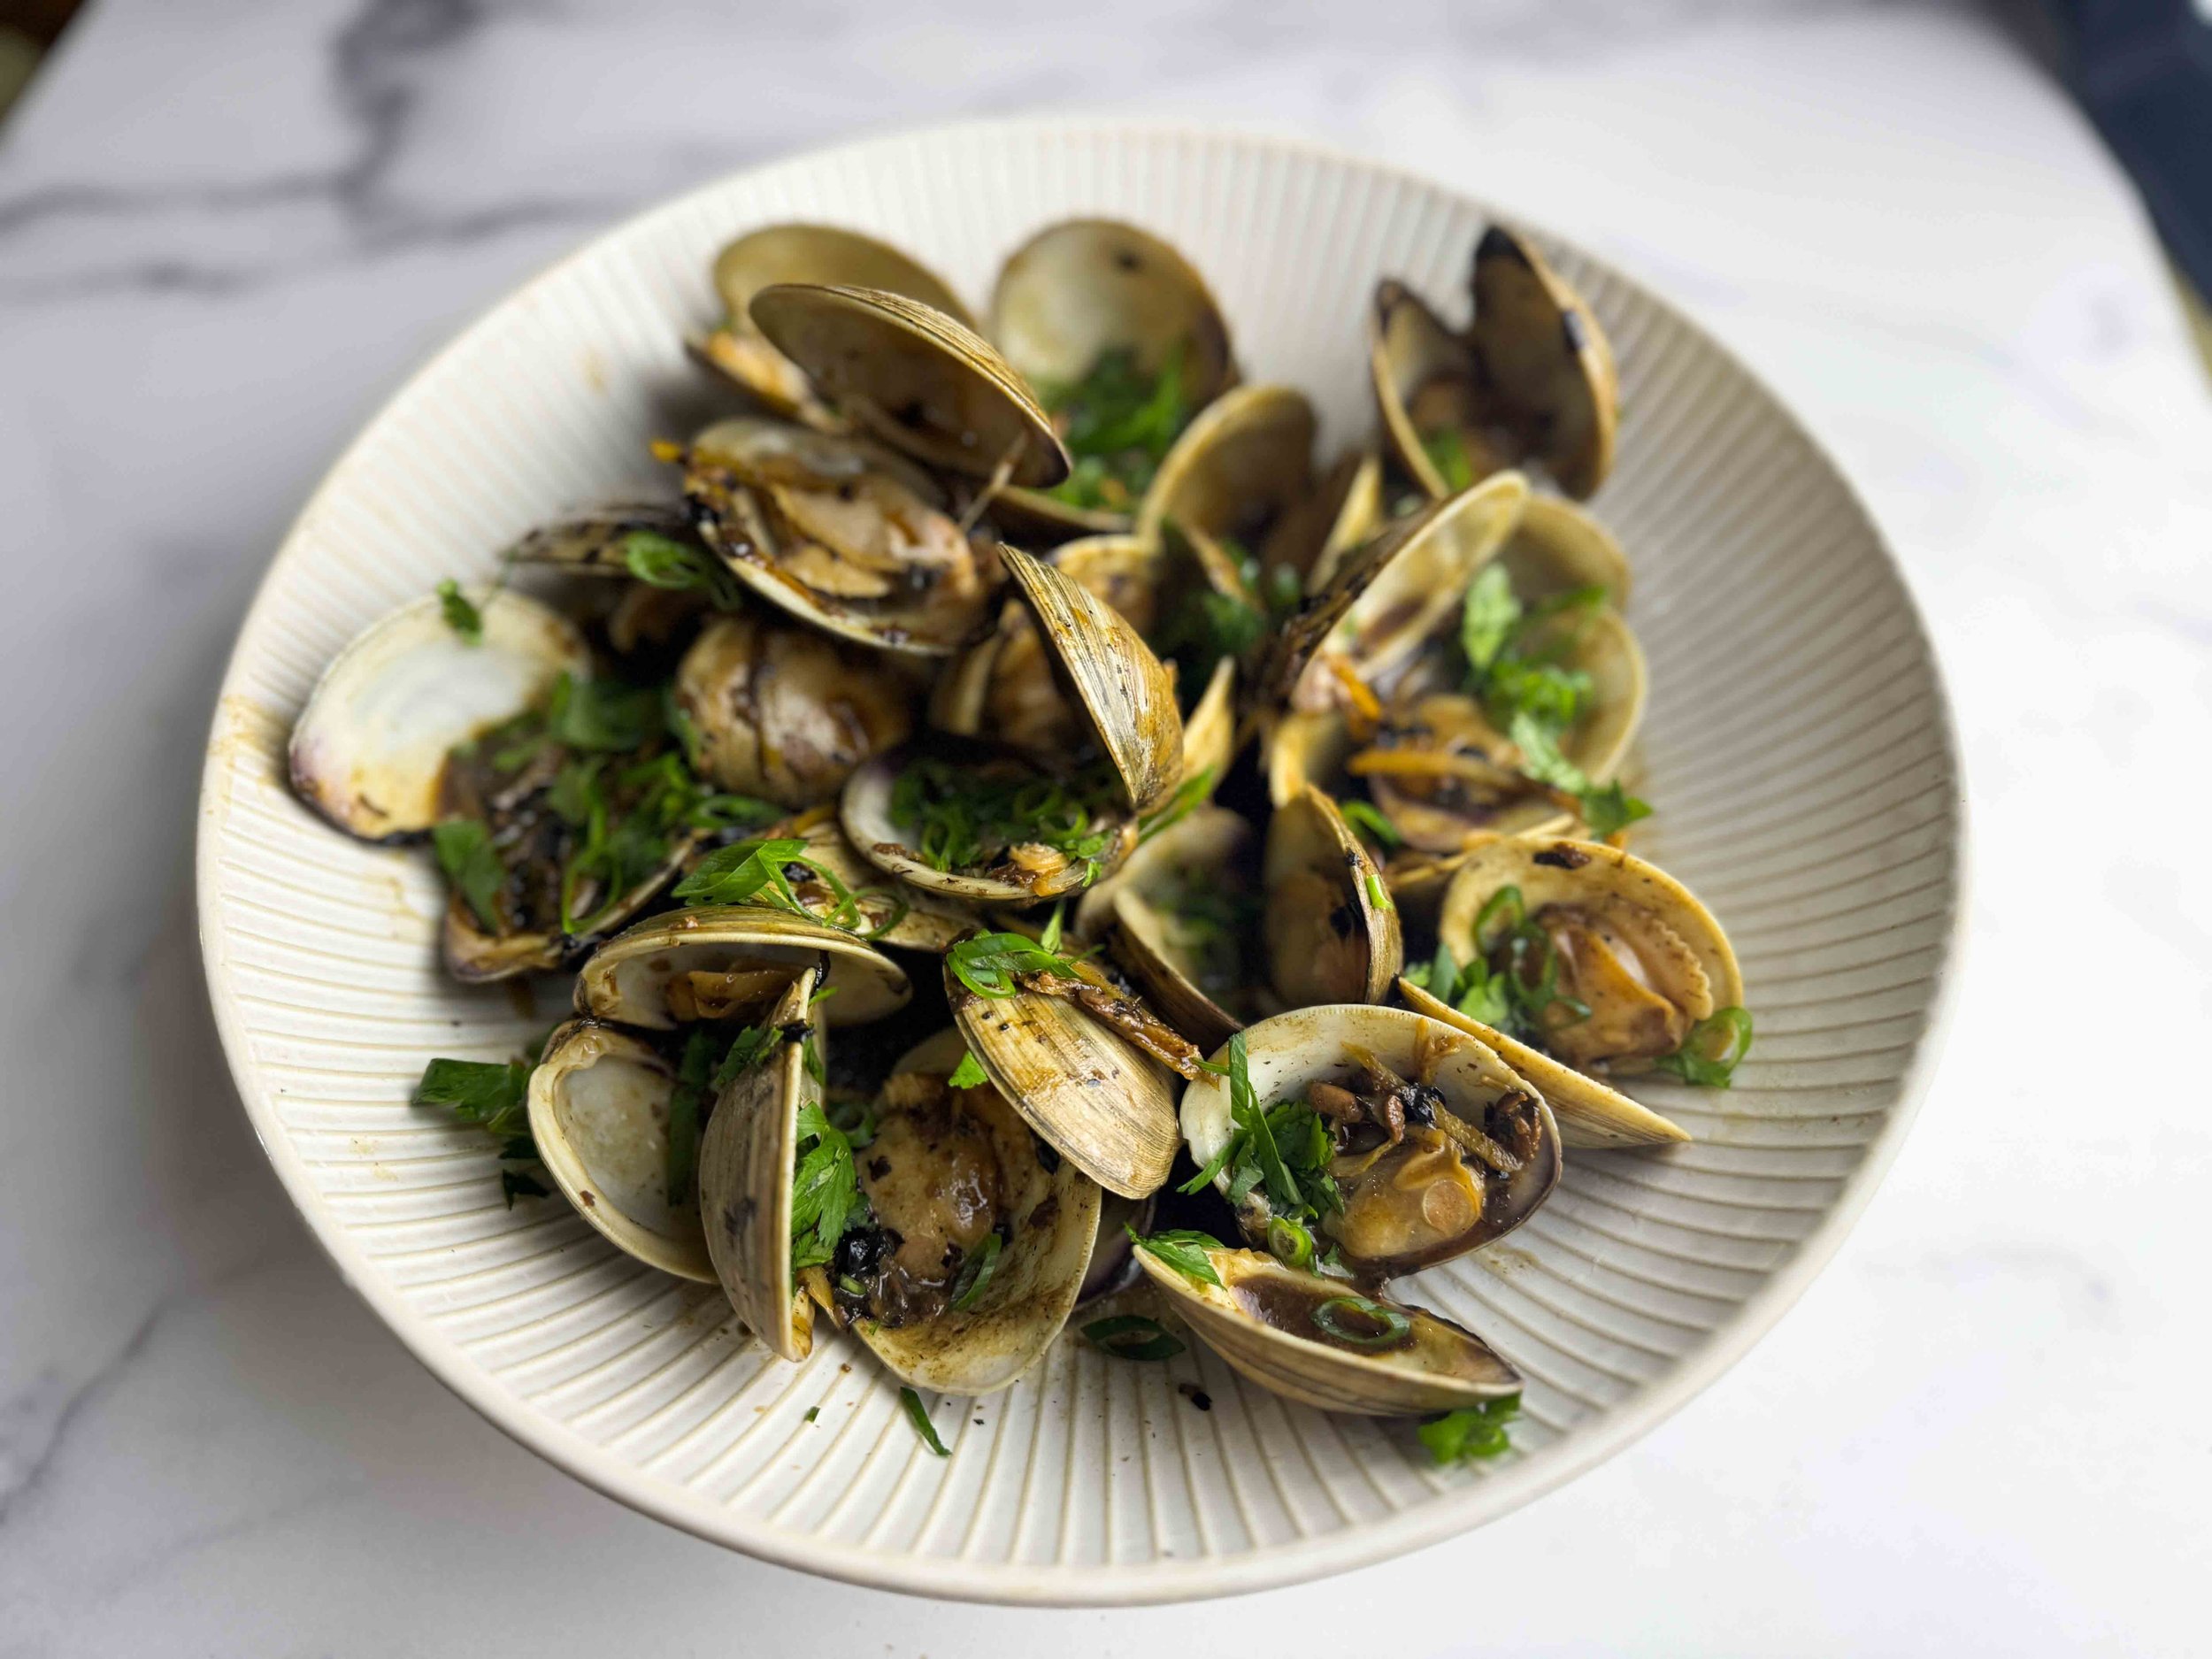 Clams Stir-Fried with Black Beans